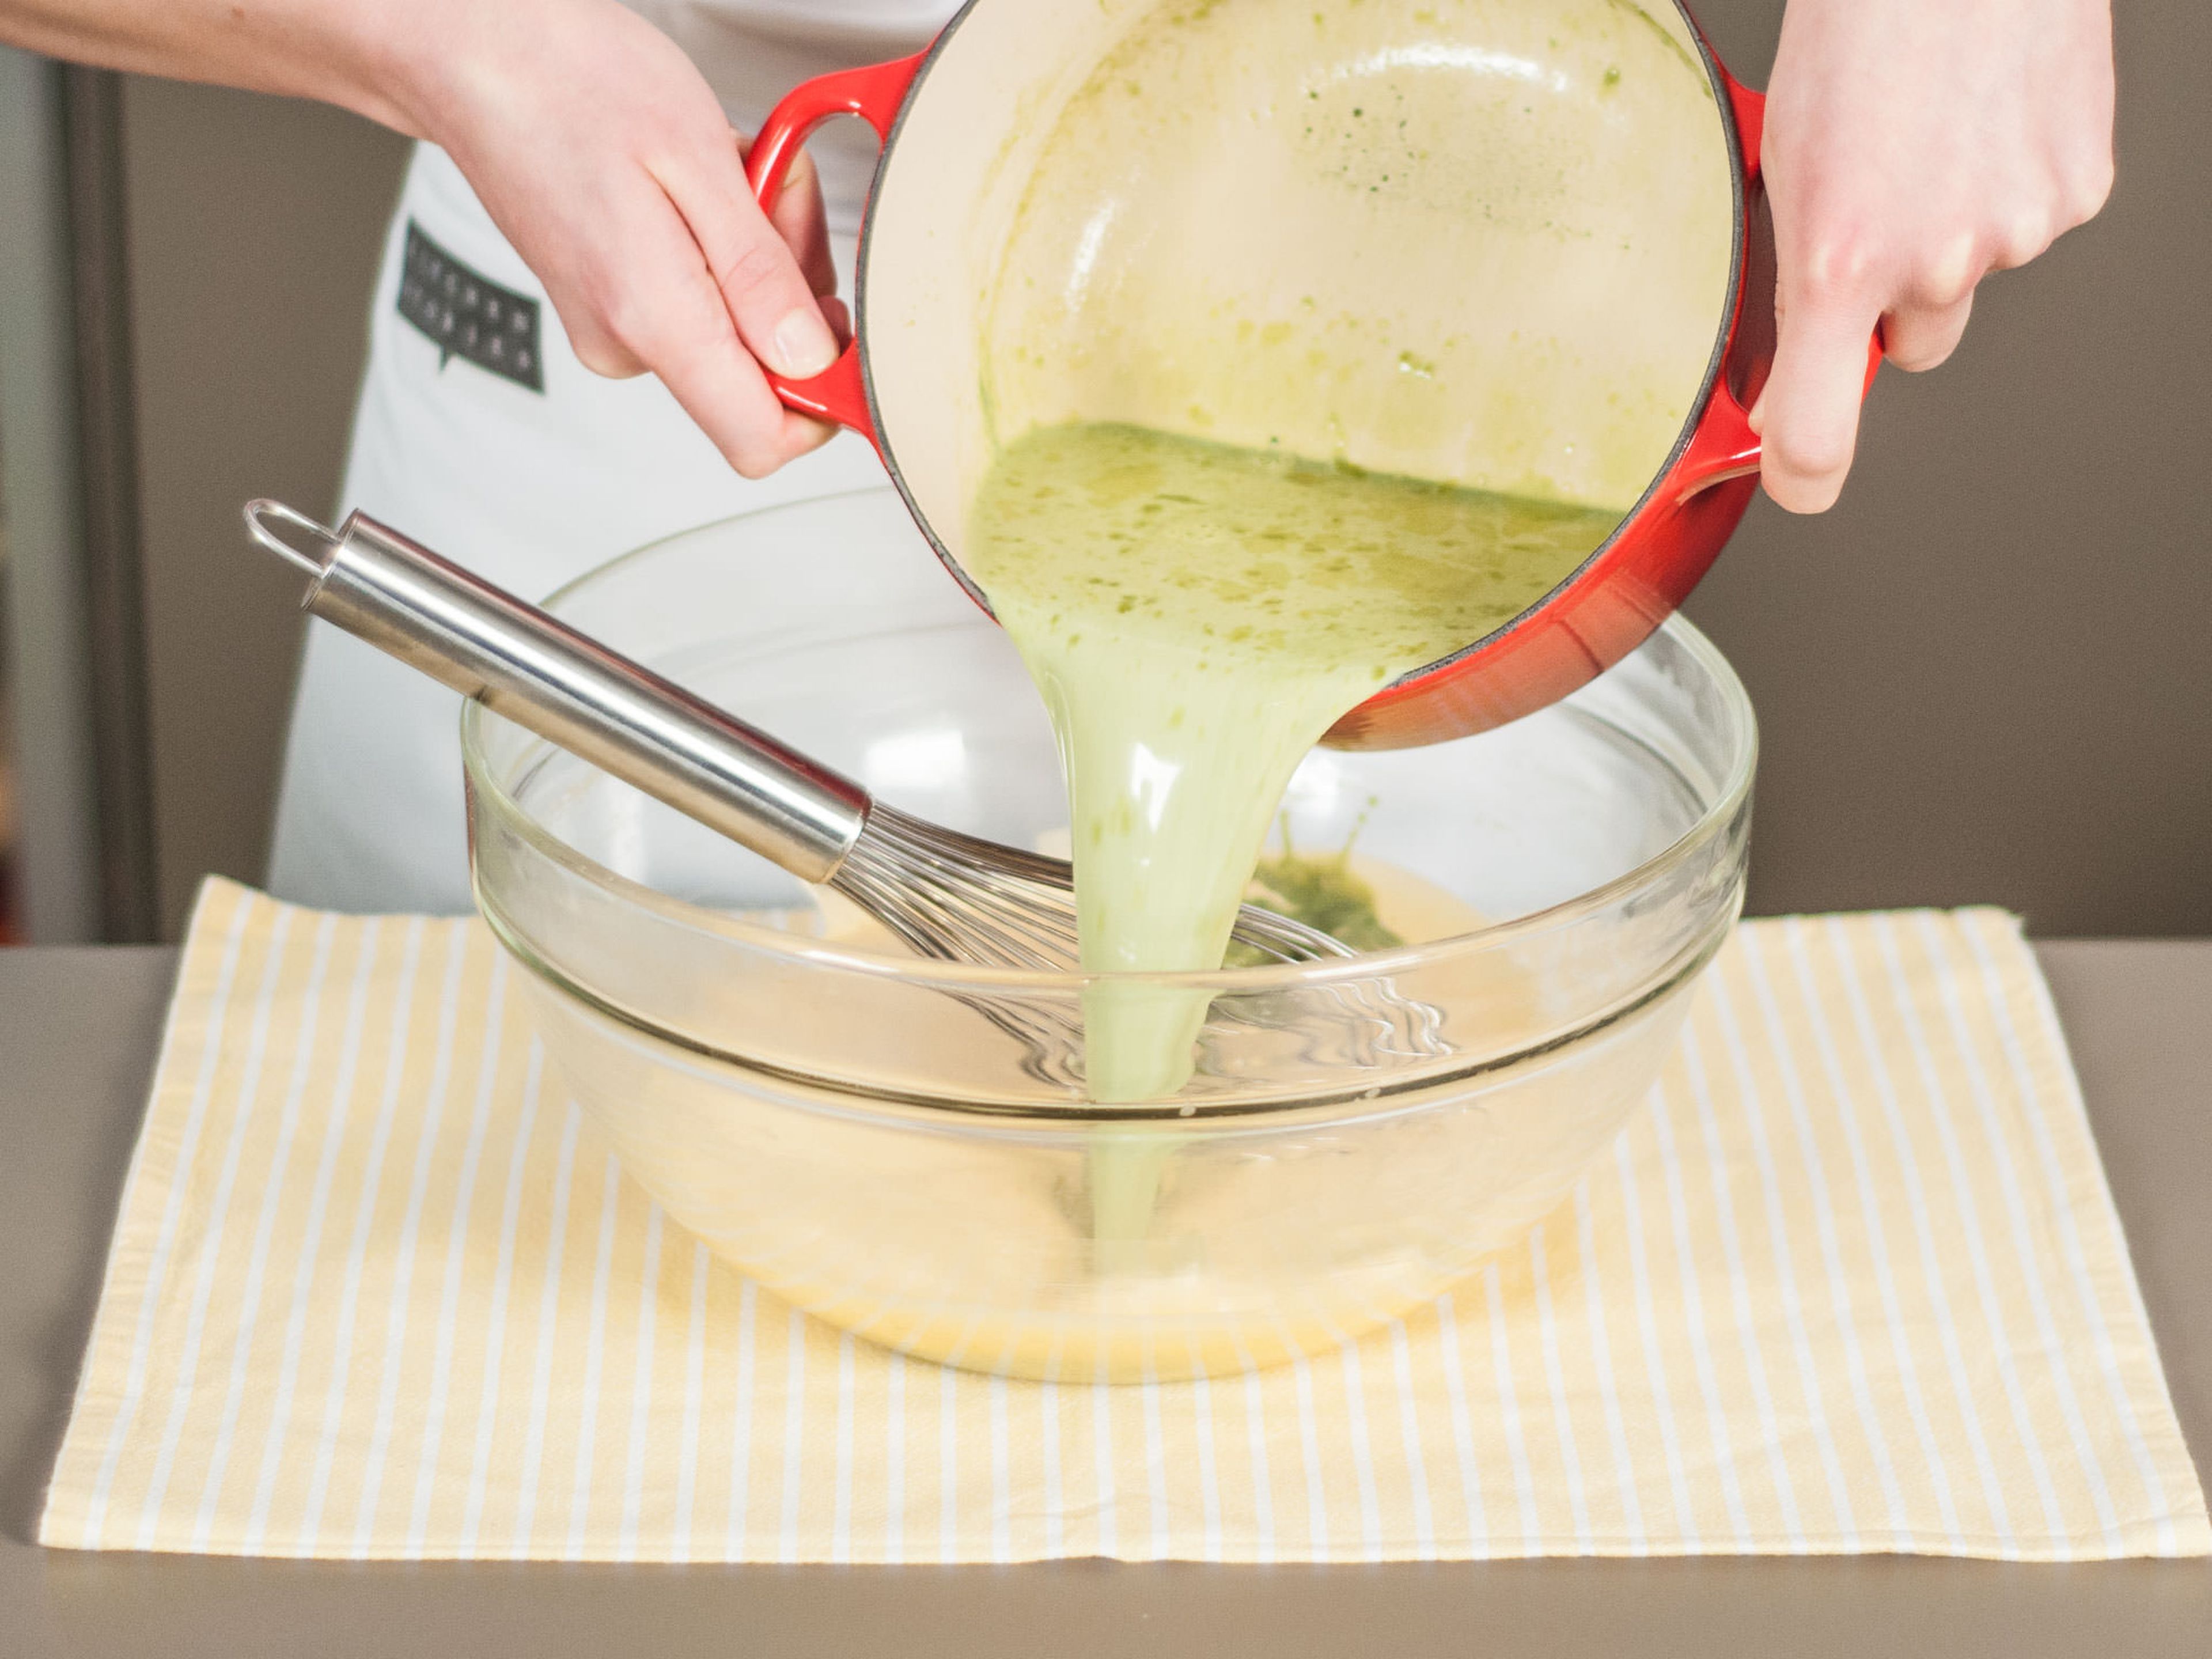 Remove egg yolk mixture from heat. Combine with matcha cream. Whisk until well combined. To cool, place over an ice bath and continue to whisk for approx. 3 – 4 min.